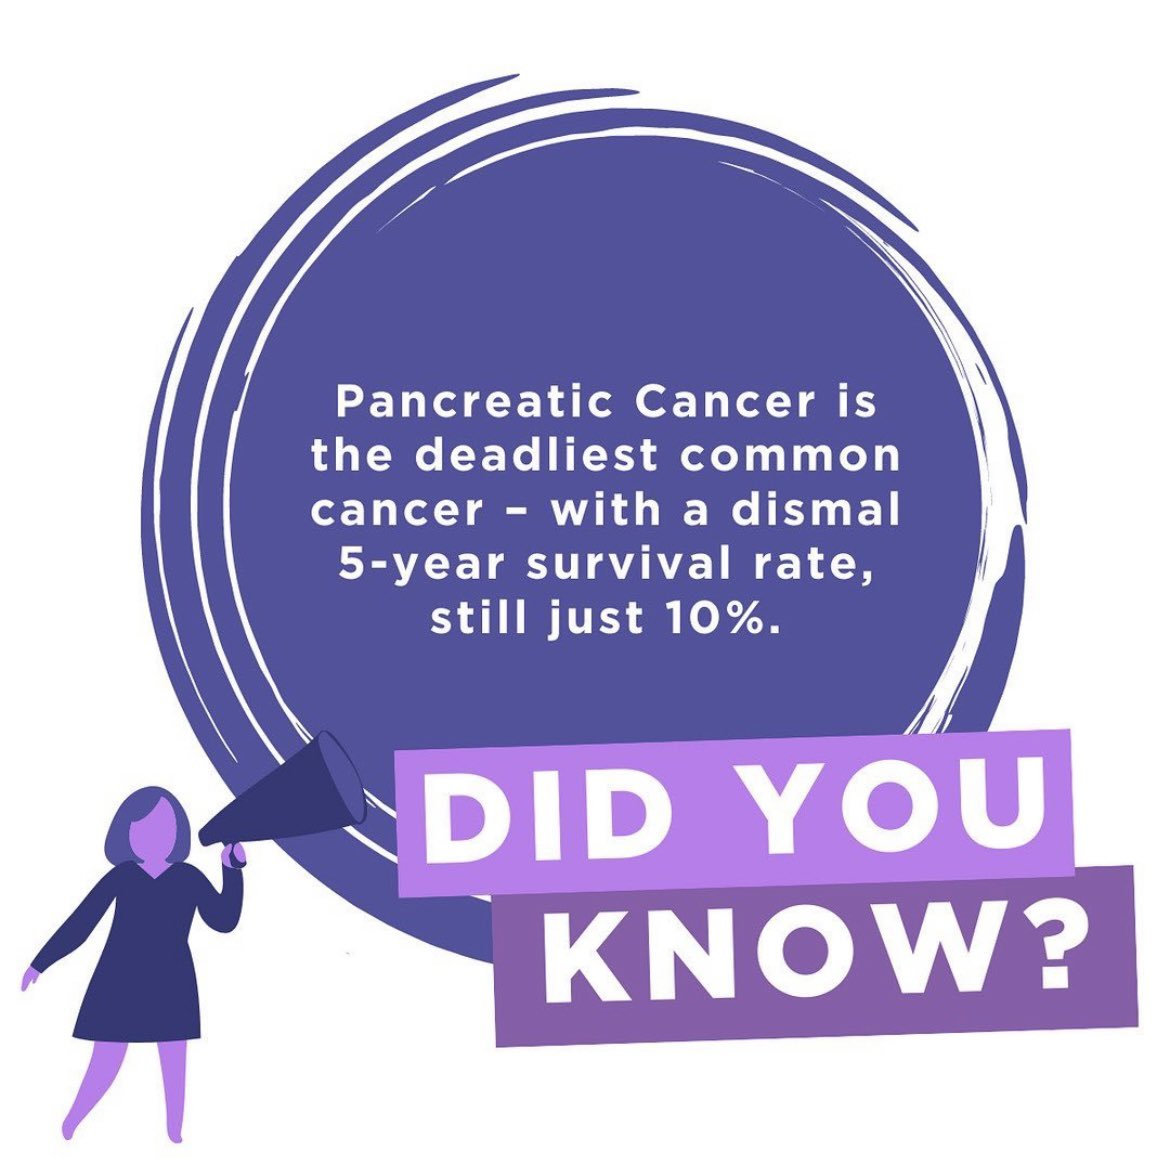 Pancreatic Cancer is the deadliest common cancer, yet it receives less than 3% of cancer research funding. 

Visit trovanow.com to learn how you get involved and donate today.  #TrovaNOW